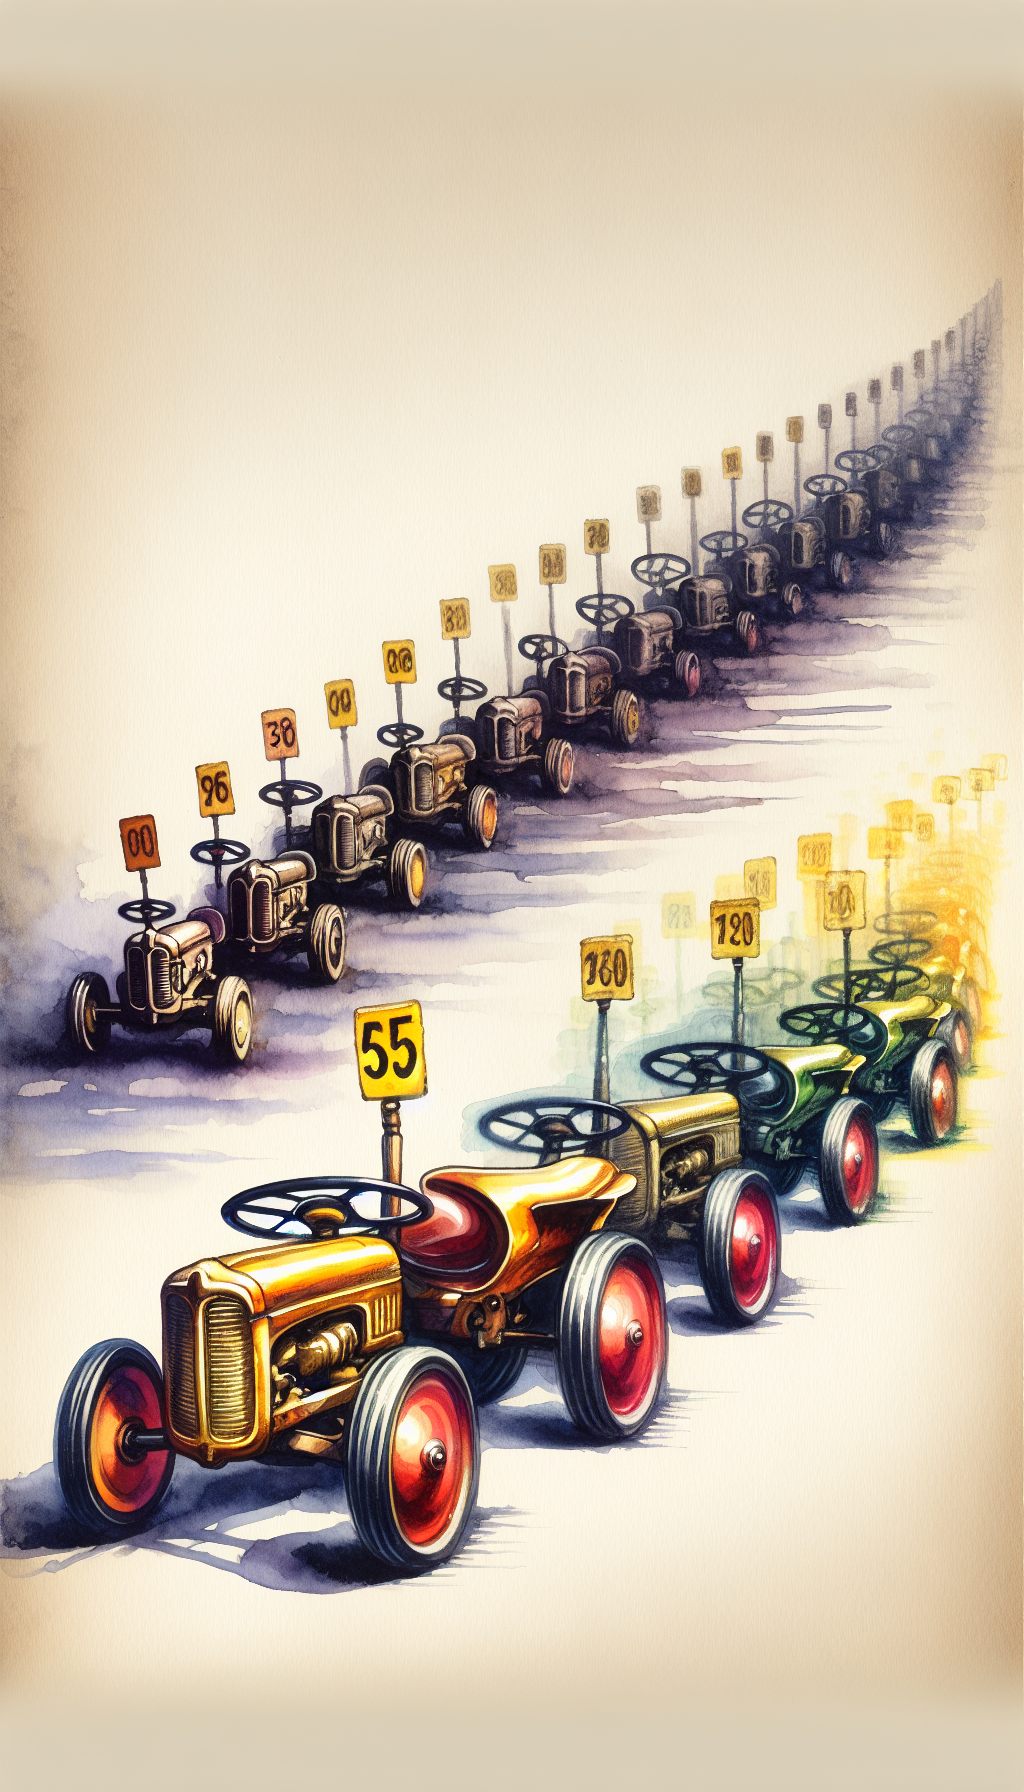 An ethereal watercolor scene capturing a whimsical array of antique pedal tractors fading into the background like memories, with a shimmering golden price tag hanging from the lead tractor's steering wheel, the tag's value variety increasing as it recedes into the past, subtly representing their growing worth over time.